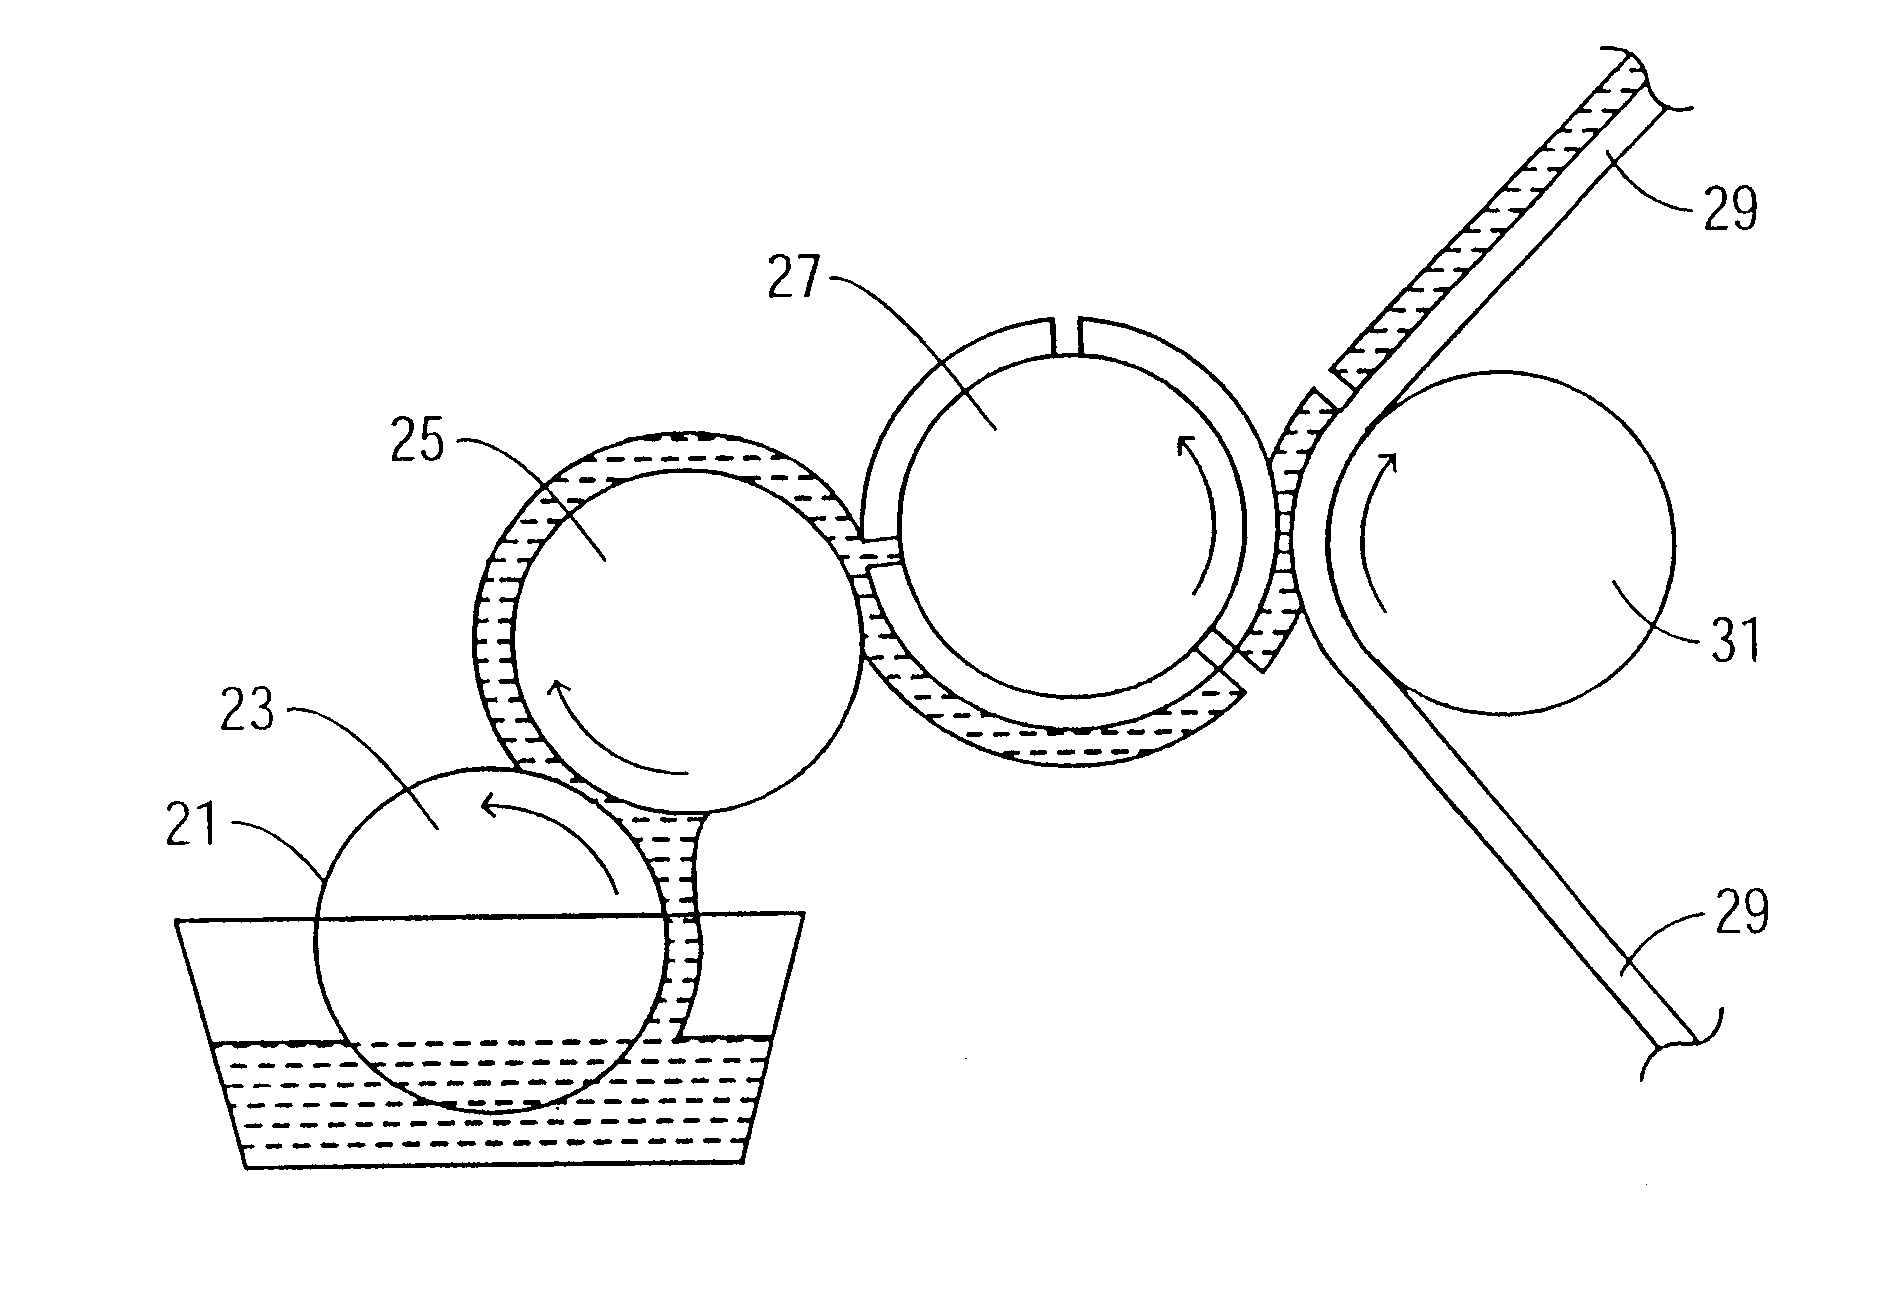 Method of producing a high gloss coating on a printed surface